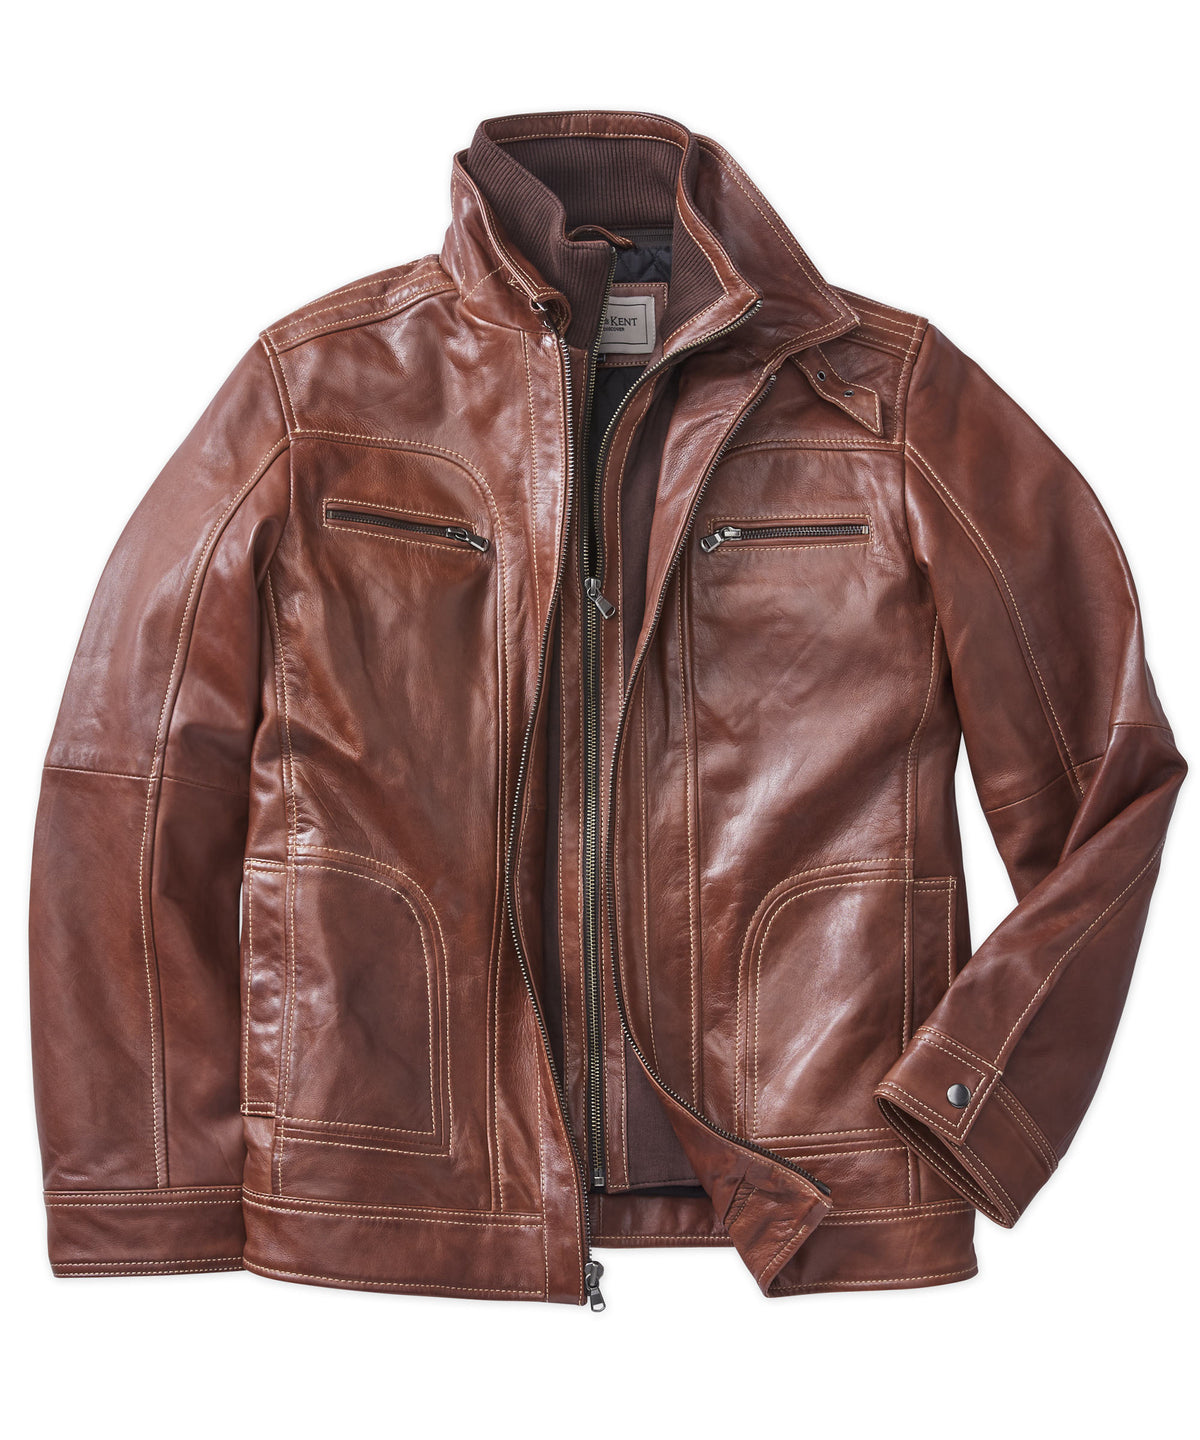 Memphis-B Leather Jacket with Removable Bib